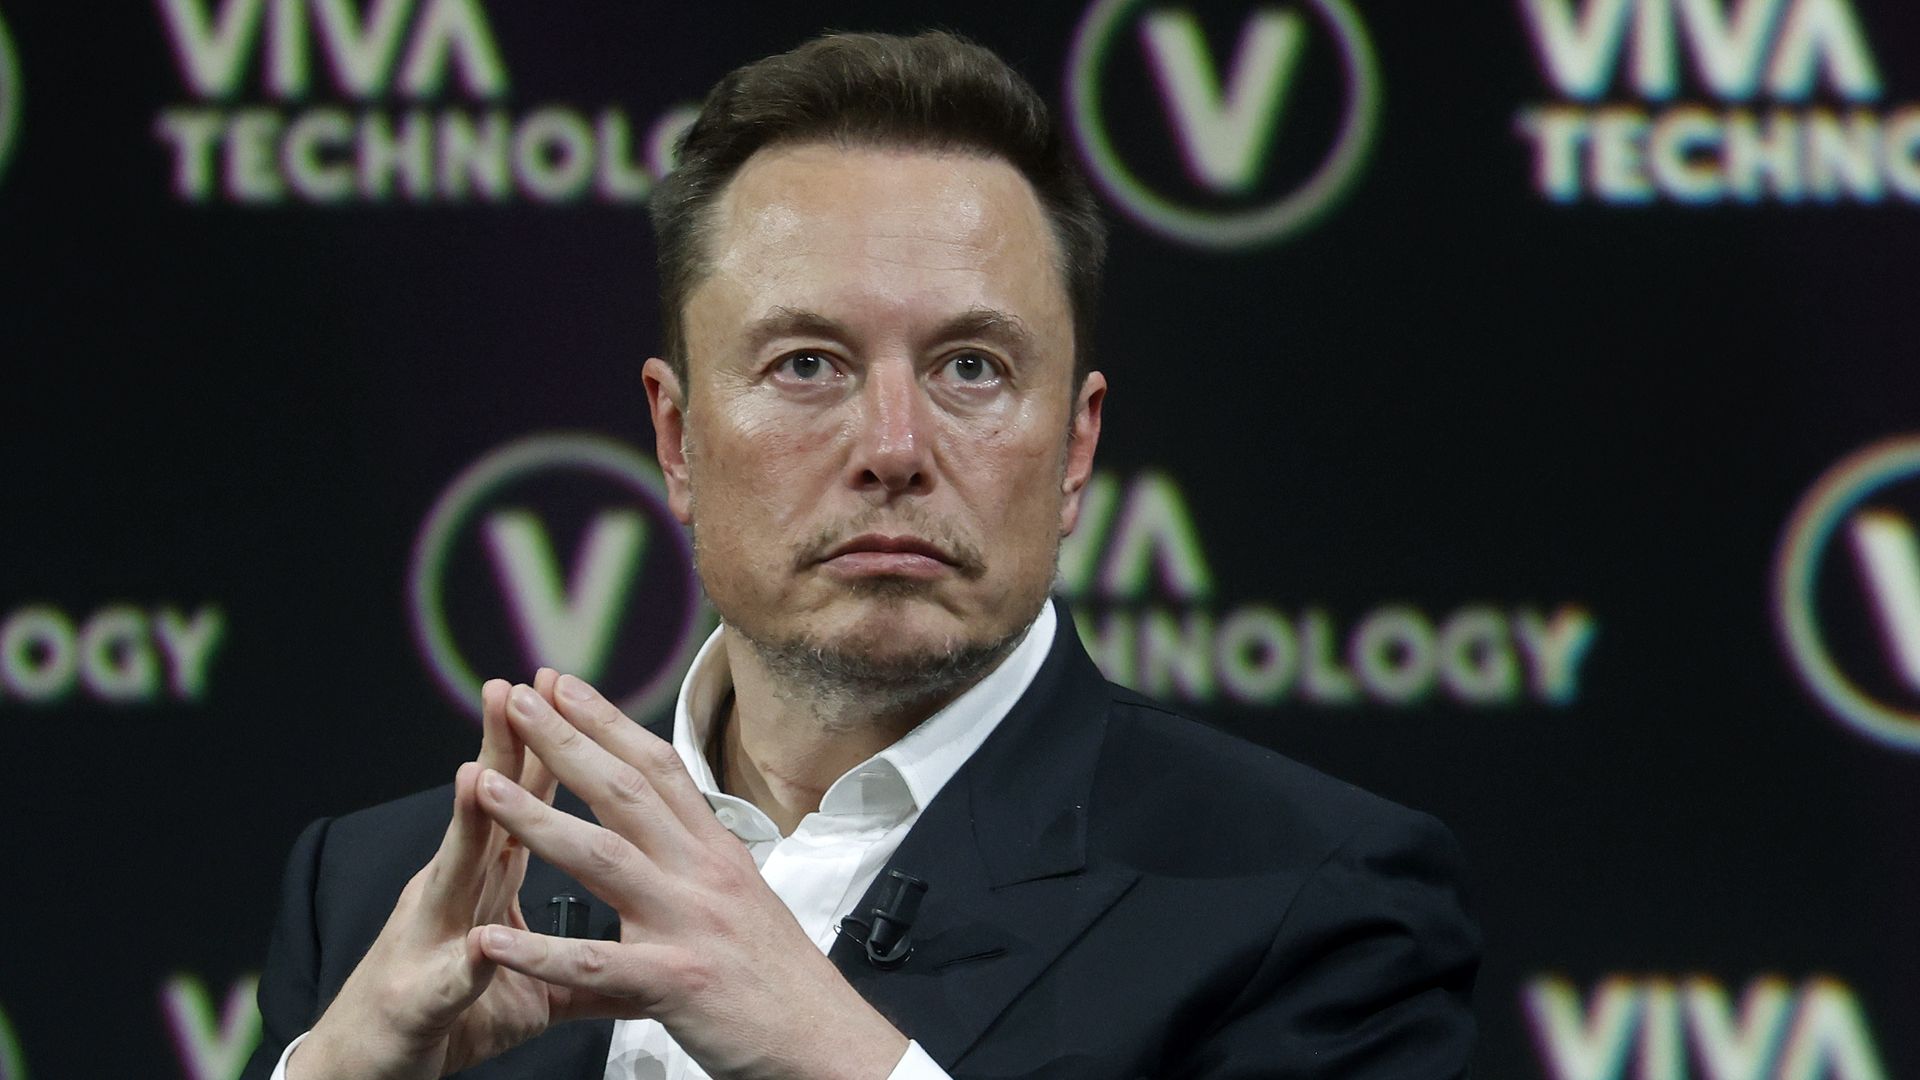 Chief Executive Officer of SpaceX and Tesla and owner of Twitter, Elon Musk attends the Viva Technology conference dedicated to innovation and startups at the Porte de Versailles exhibition centre on June 16, 2023 in Paris, France. 